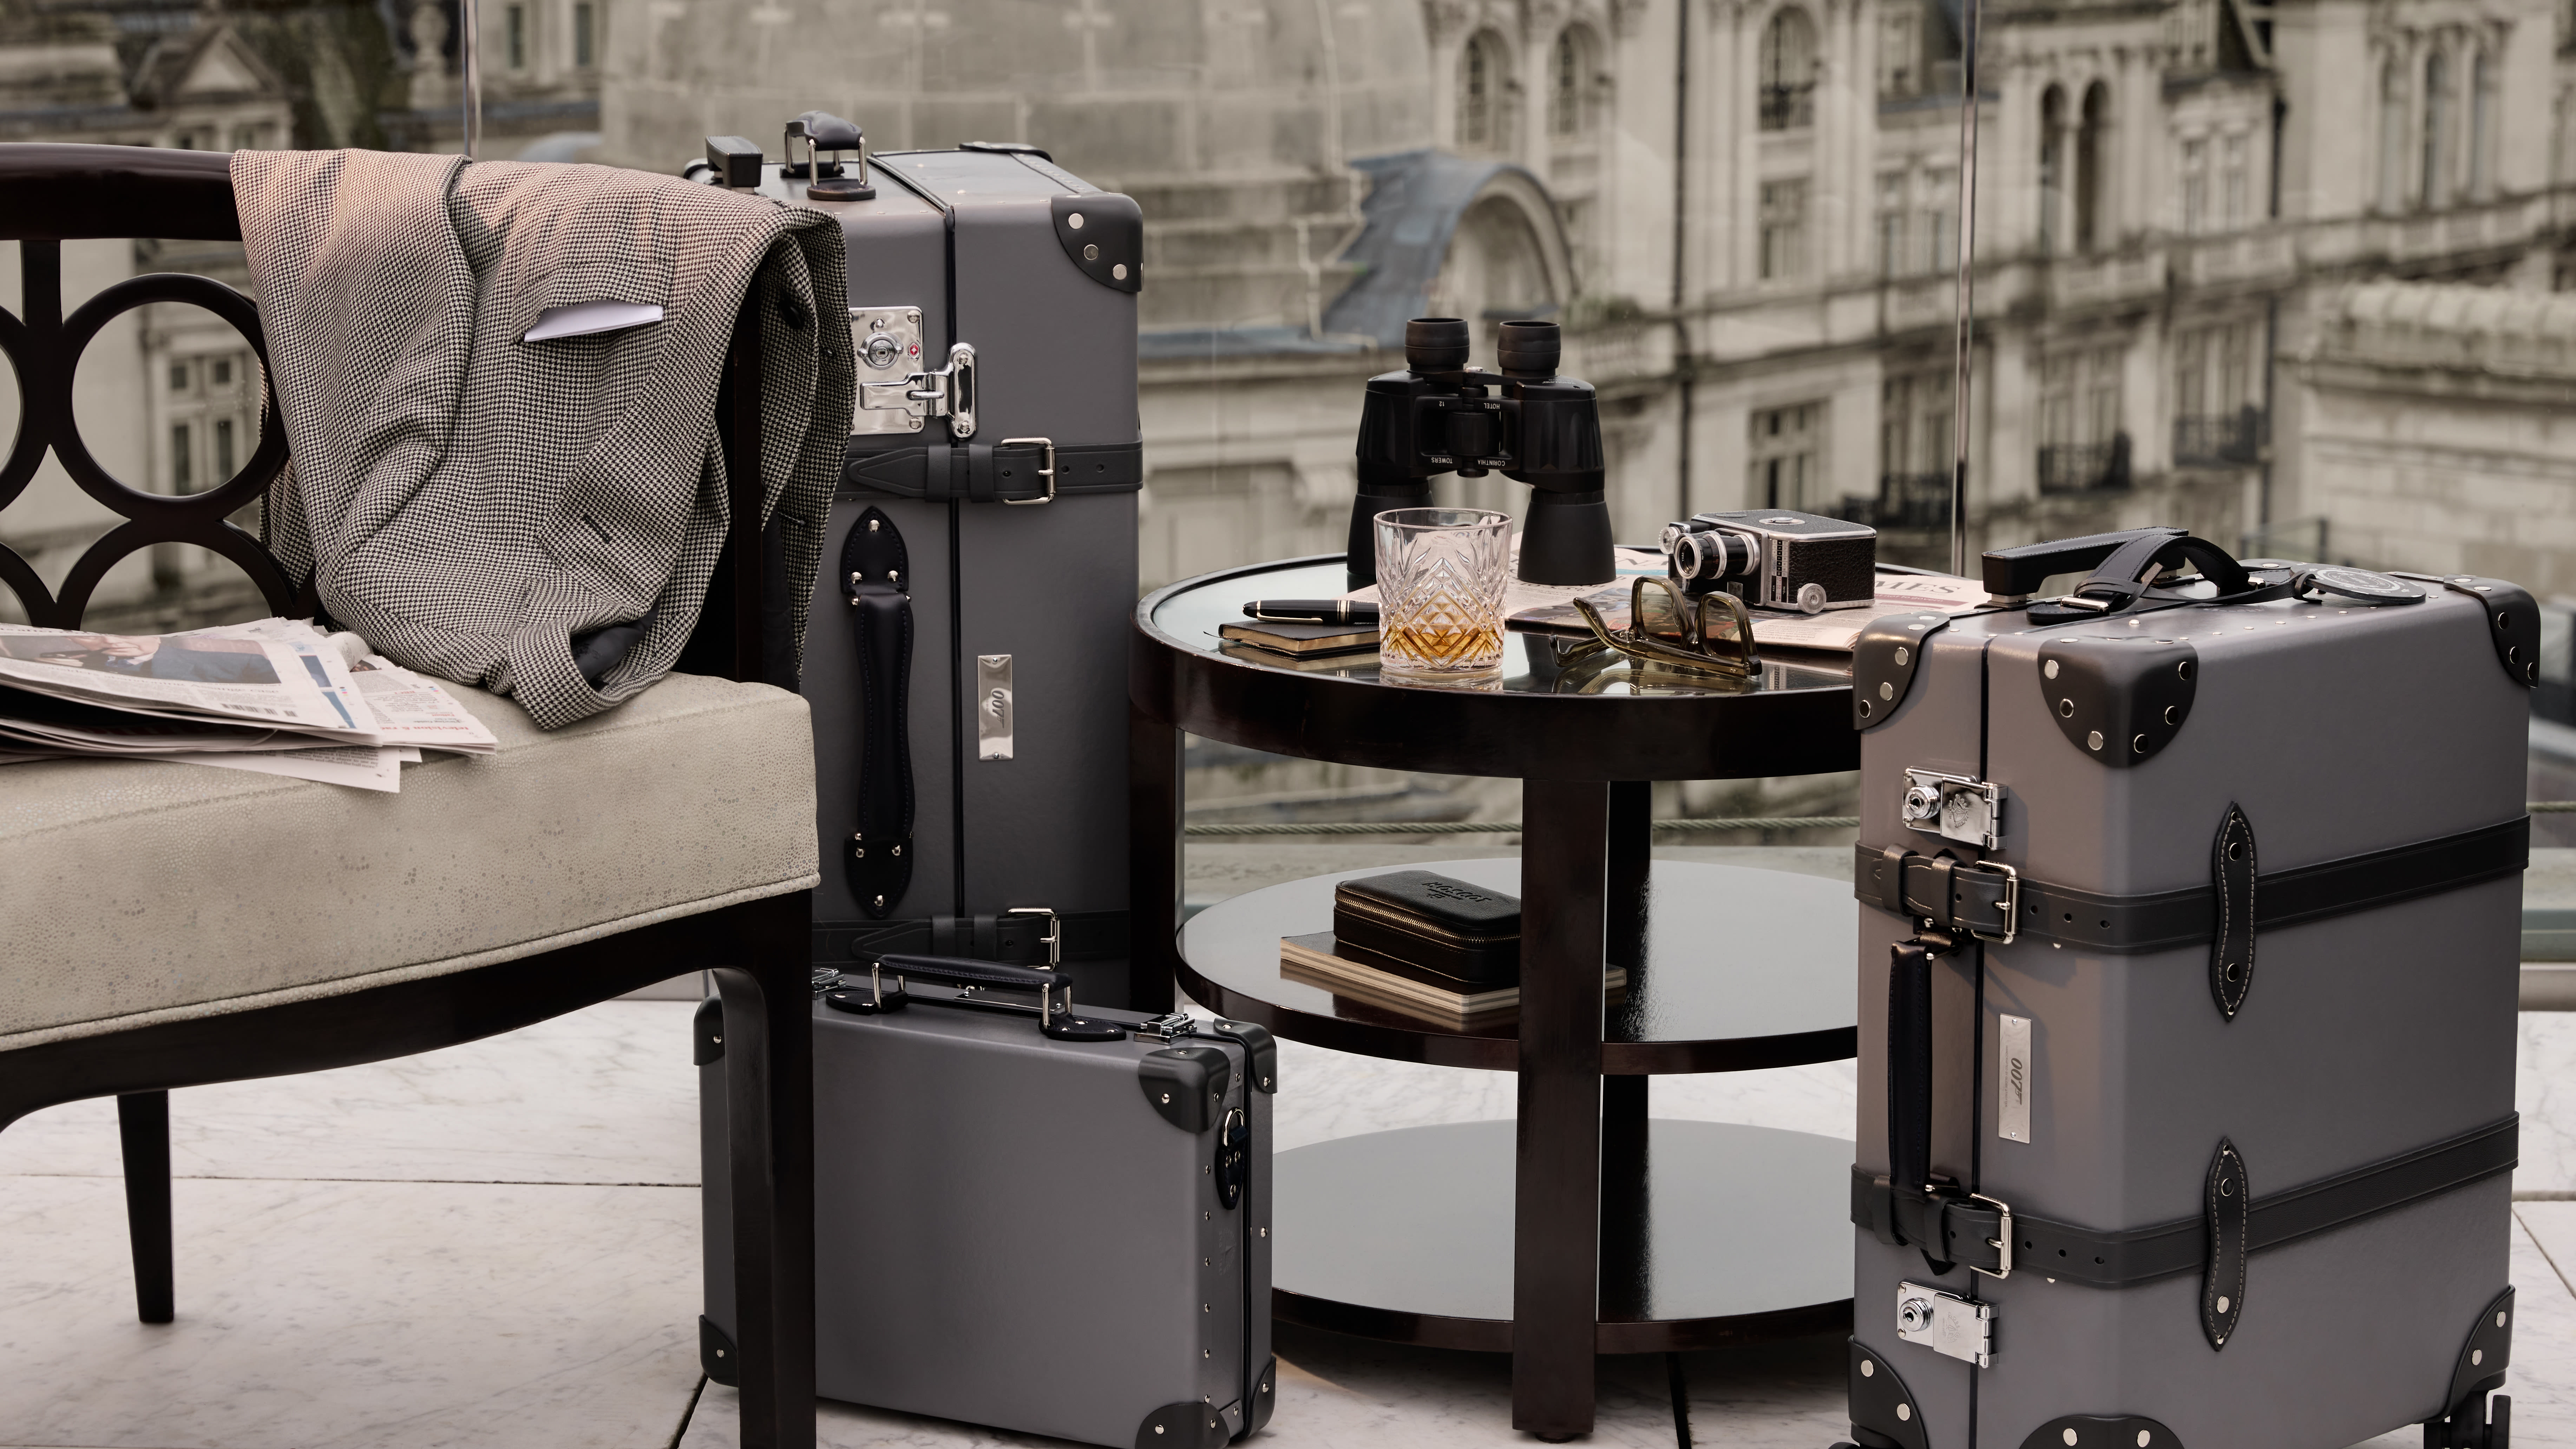 James Bond-inspired suitcases are the ultimate luxury travel solution